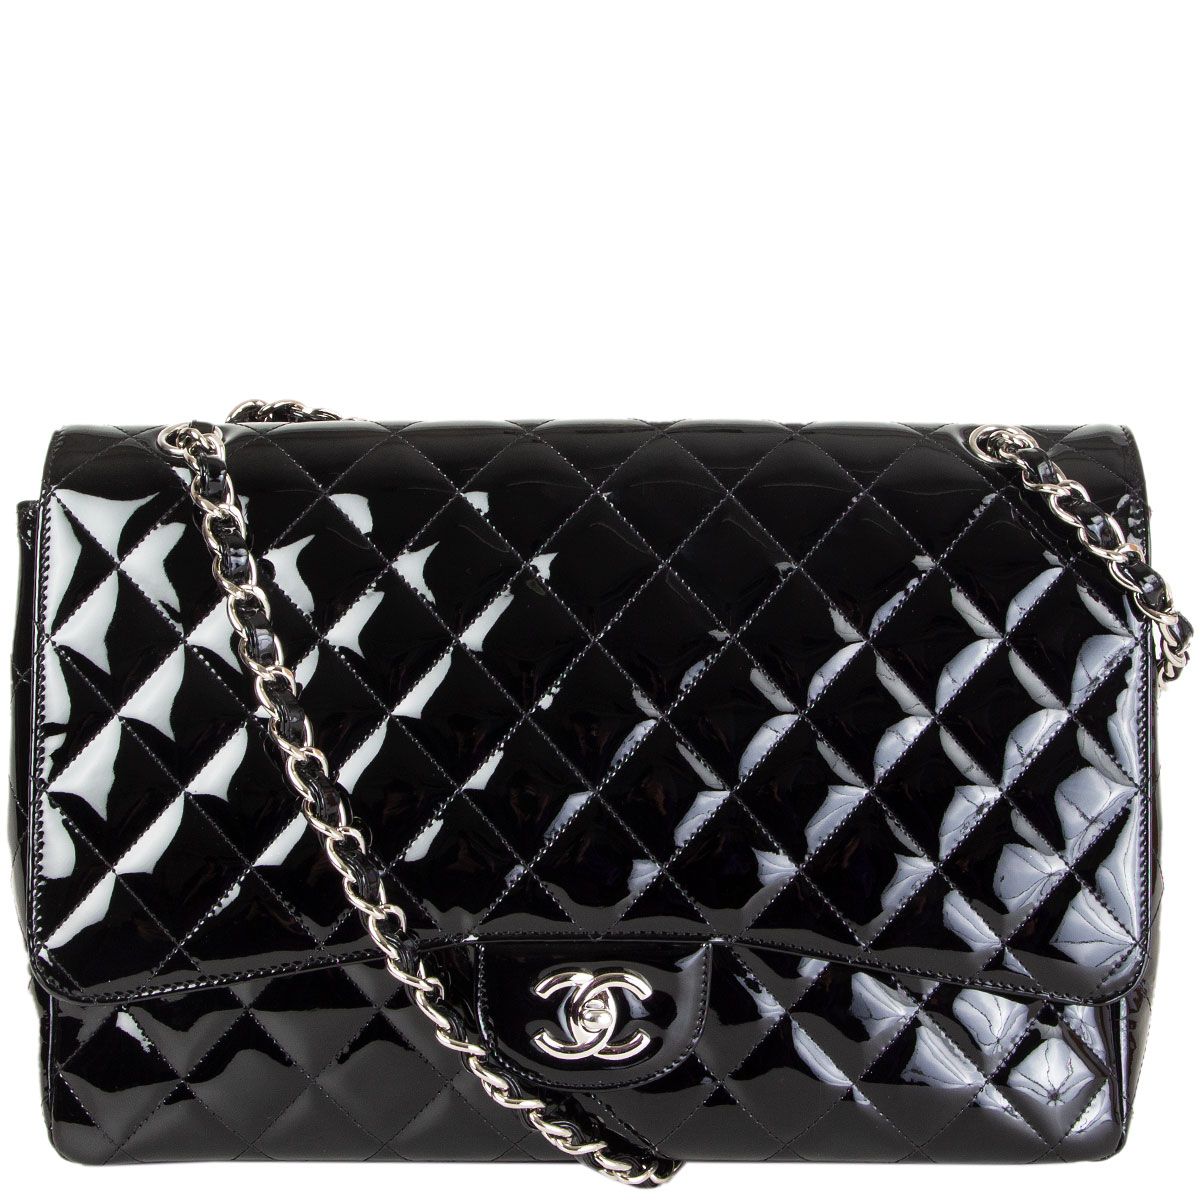 Chanel Single Flap Maxi Classic Shoulder Bag Black Quilted Patent